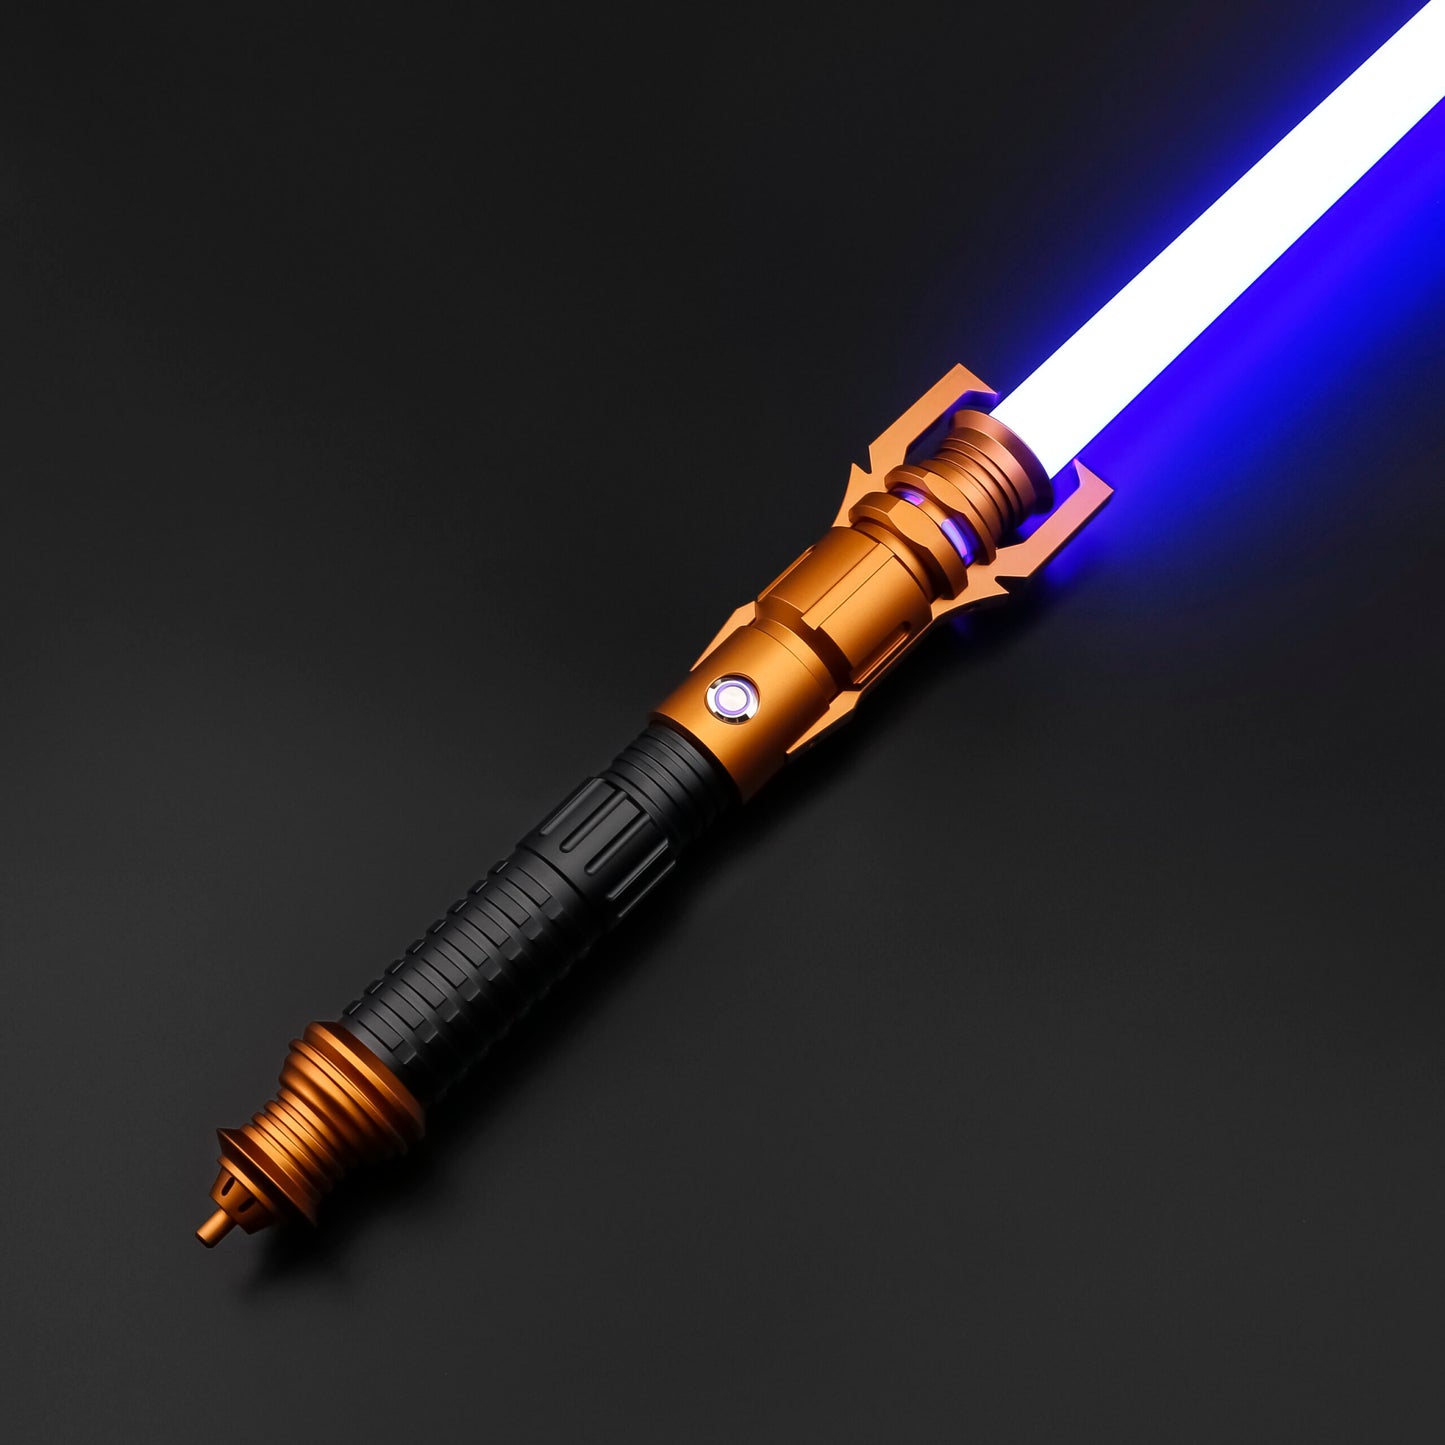 THE WICKED WANDERER SABER